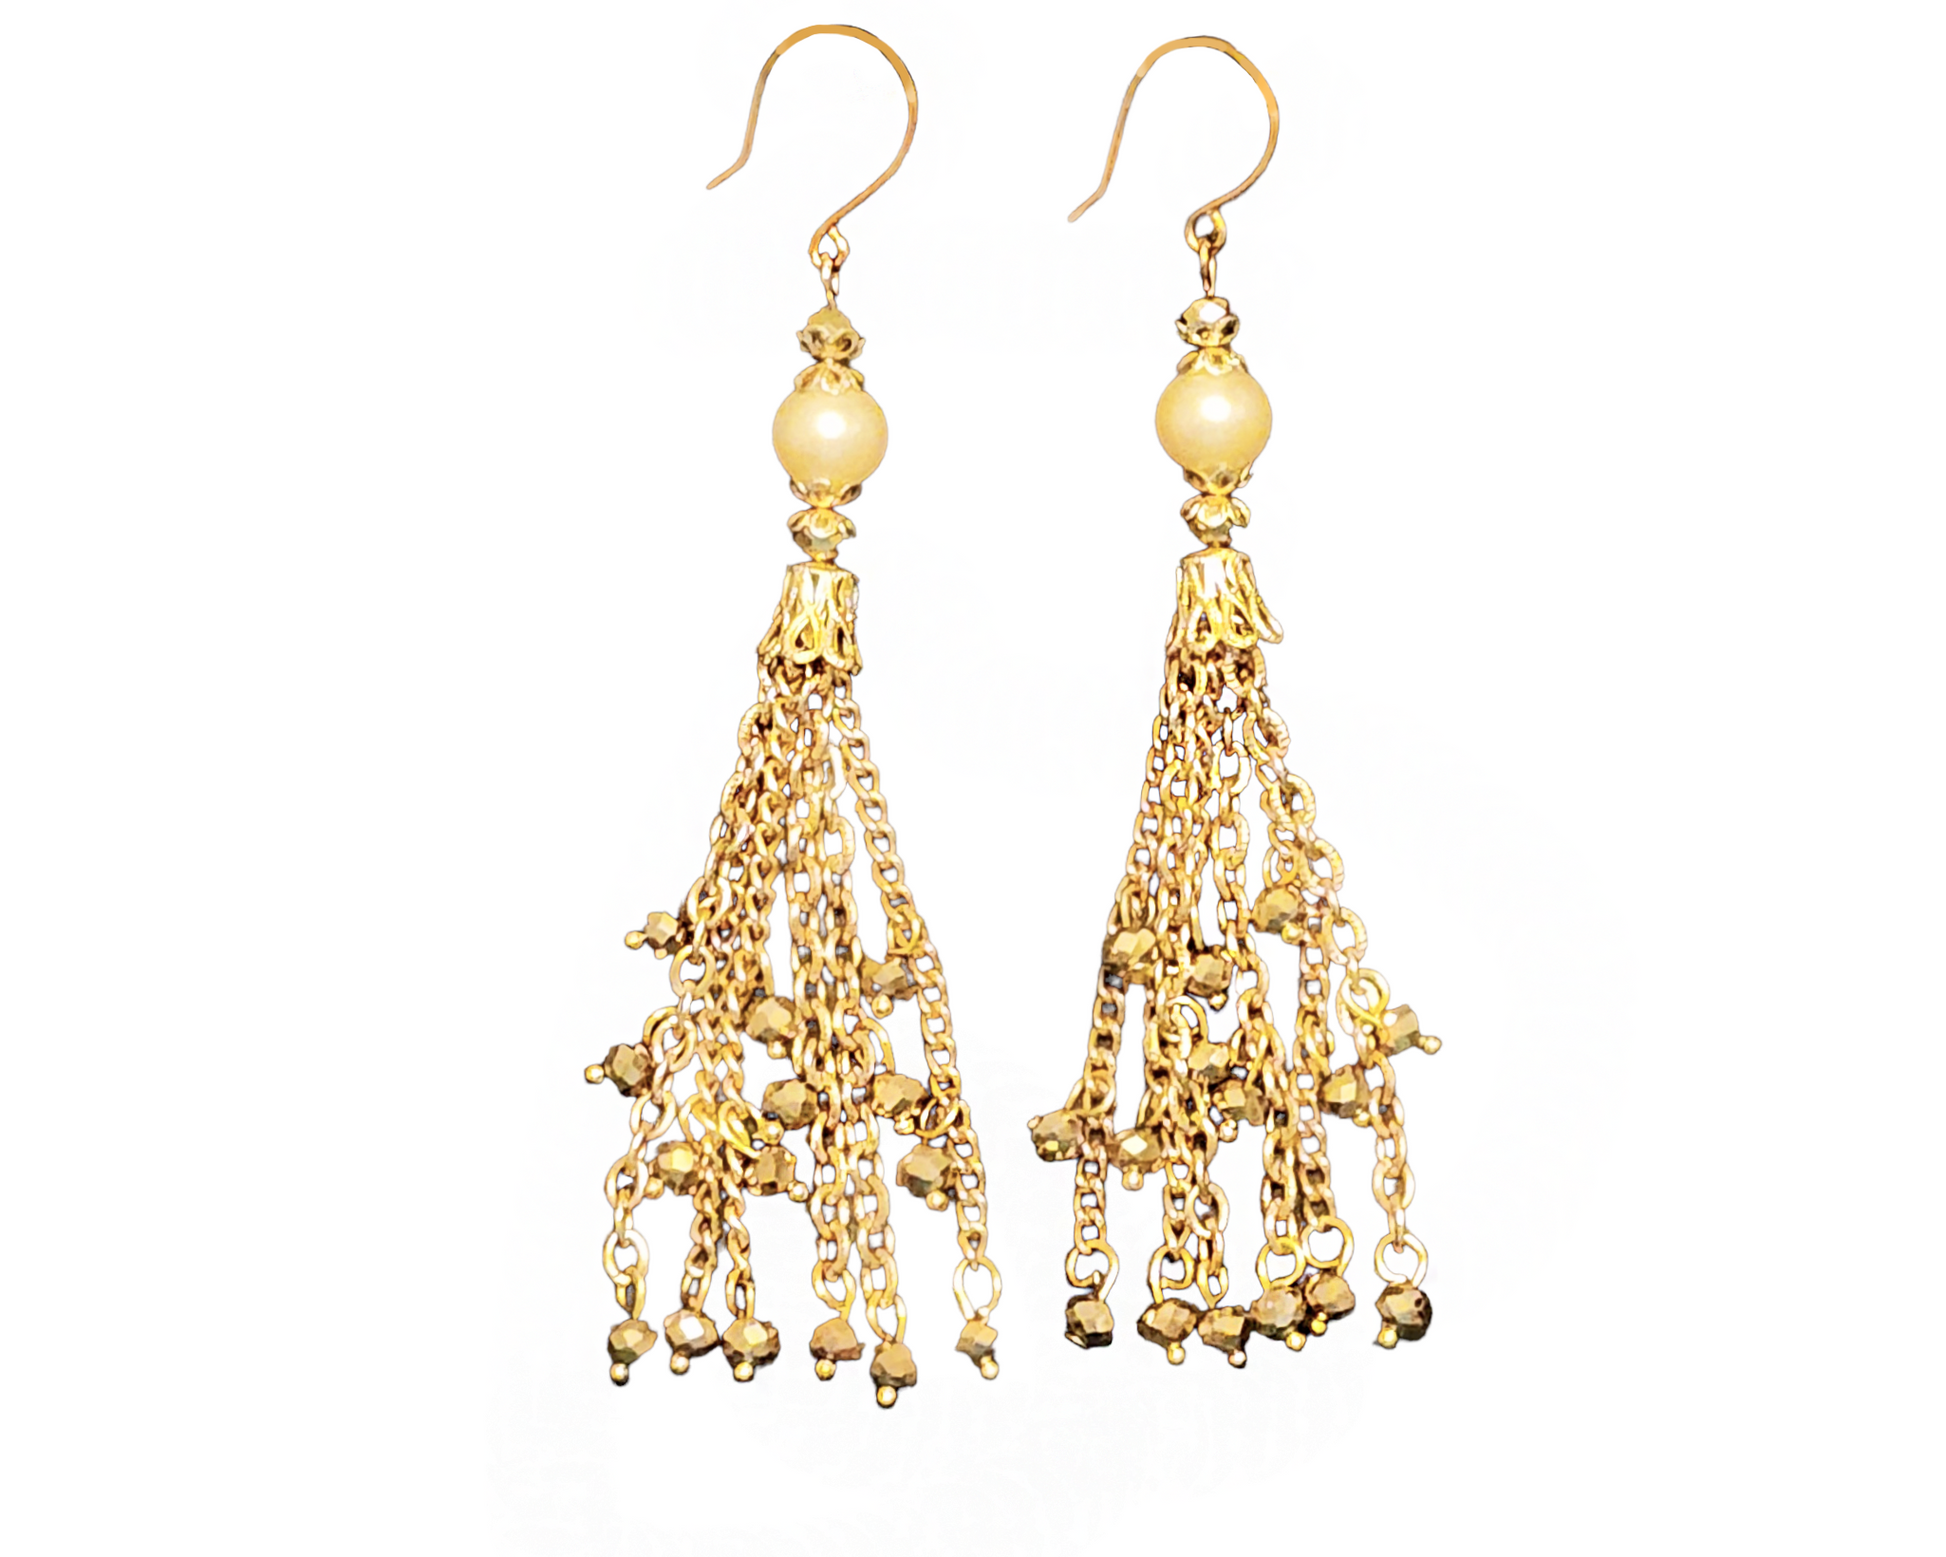 Long Art Deco Style Tassel Earrings, Tassel made with long strands of chains with gold crystals dangling below off white pearls. 